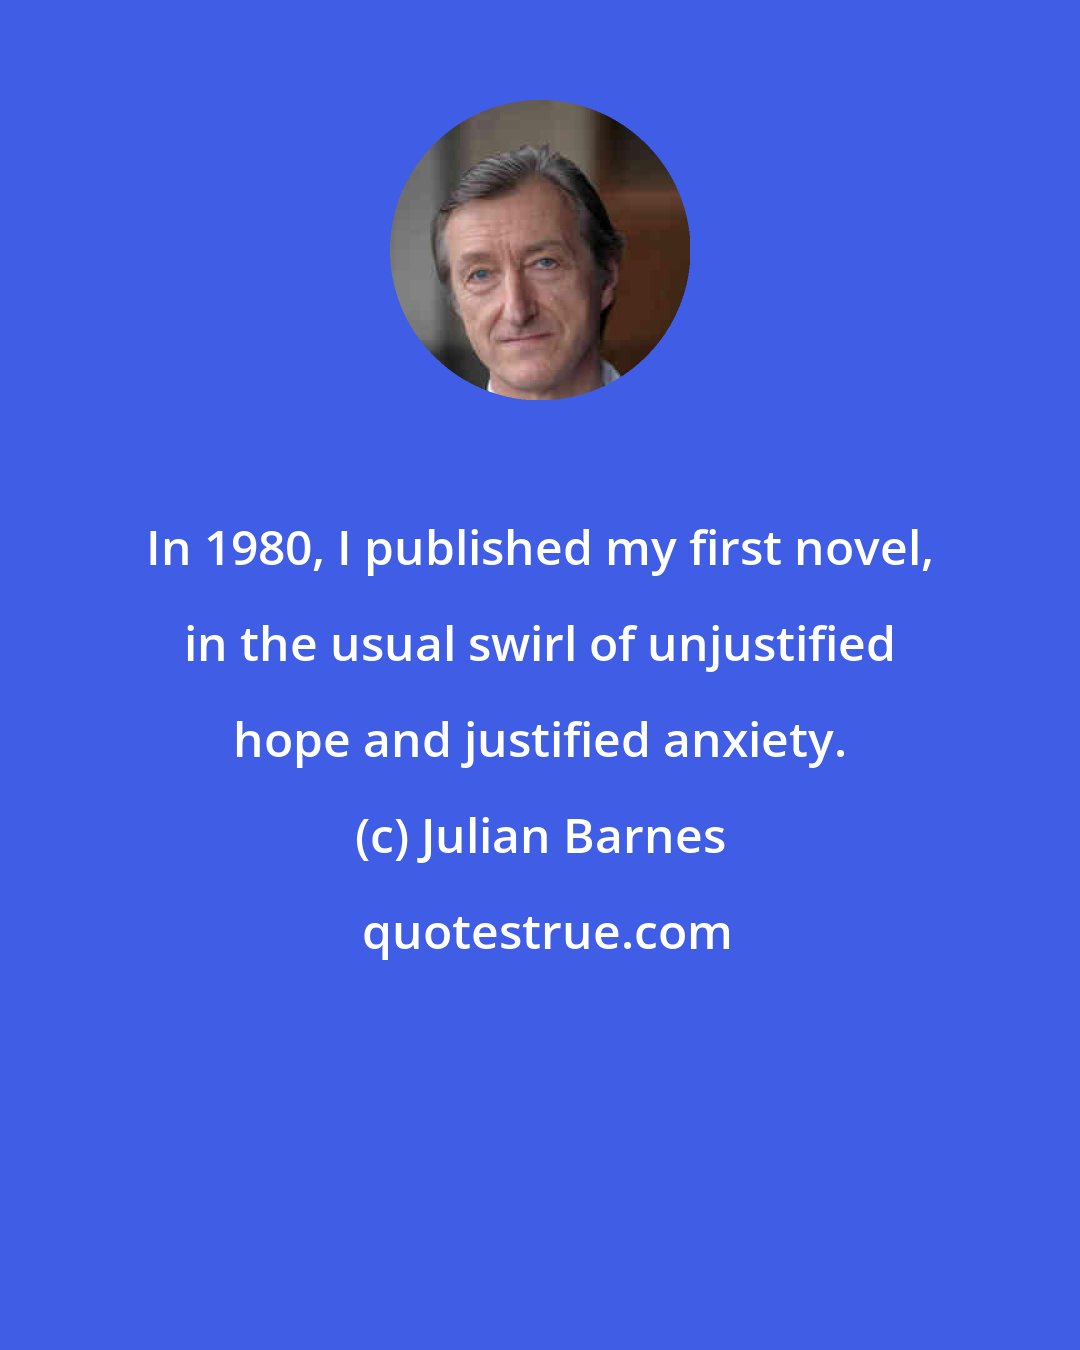 Julian Barnes: In 1980, I published my first novel, in the usual swirl of unjustified hope and justified anxiety.